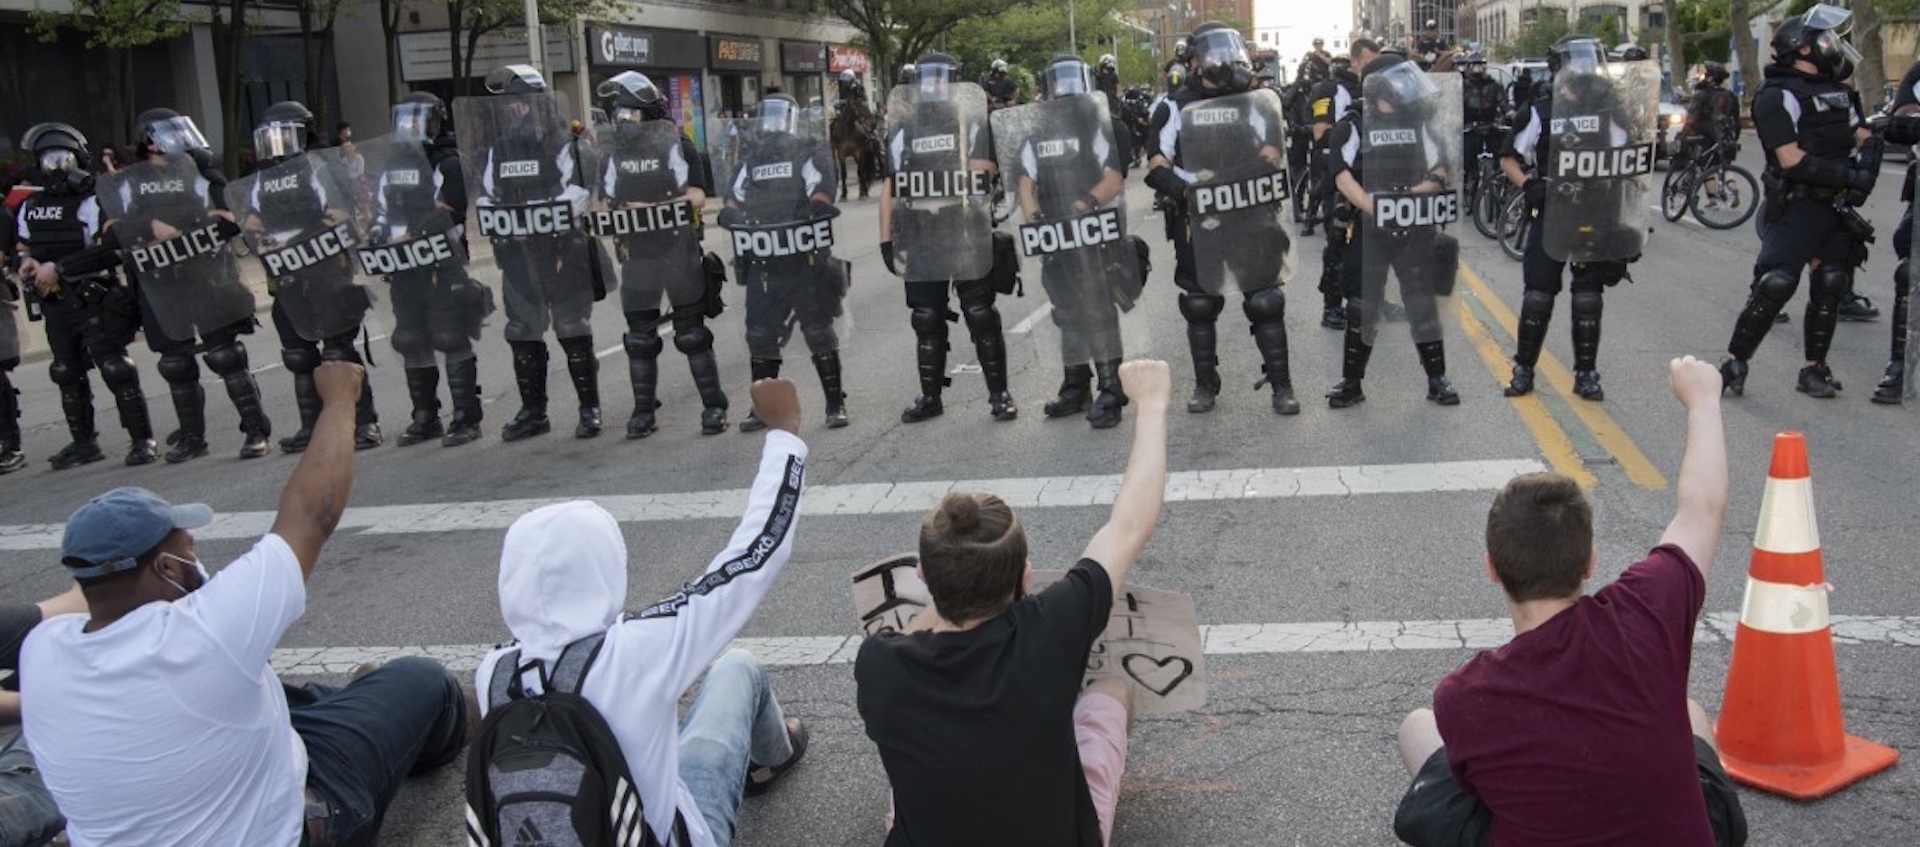 A line of four individuals protesting the death of George Floyd seated on the street, each with one fist raised, facing a line of police in riot gear